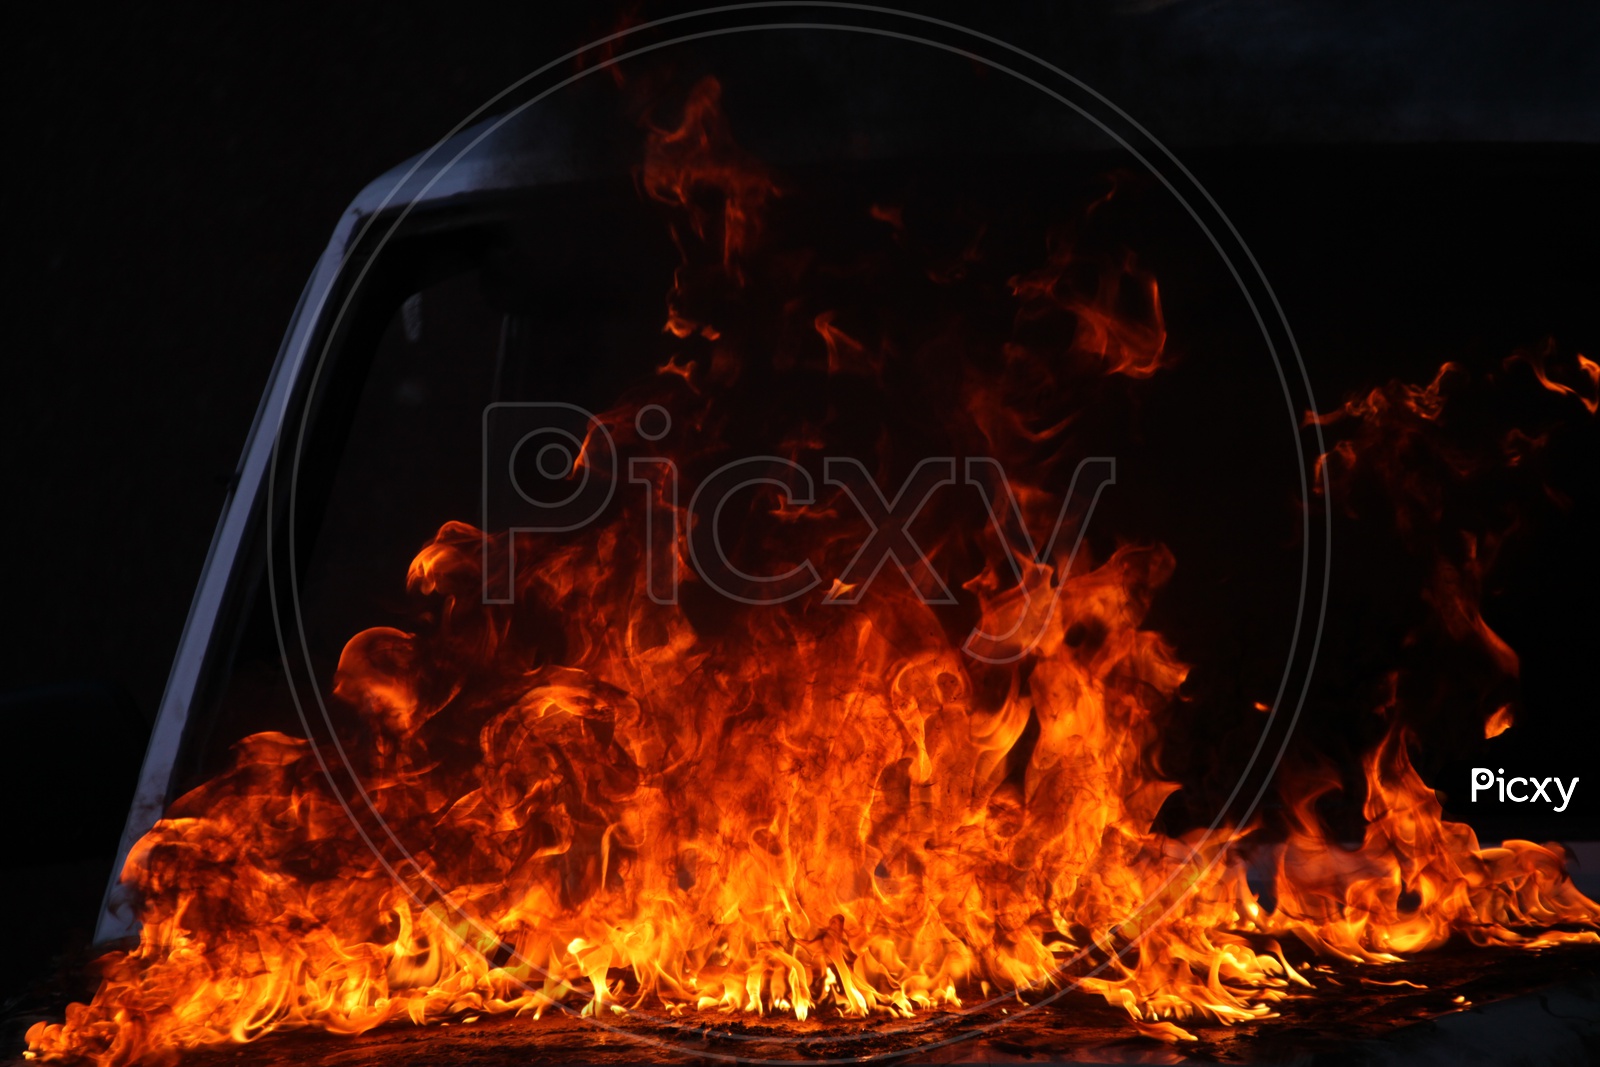 Photograph of  Fire flames